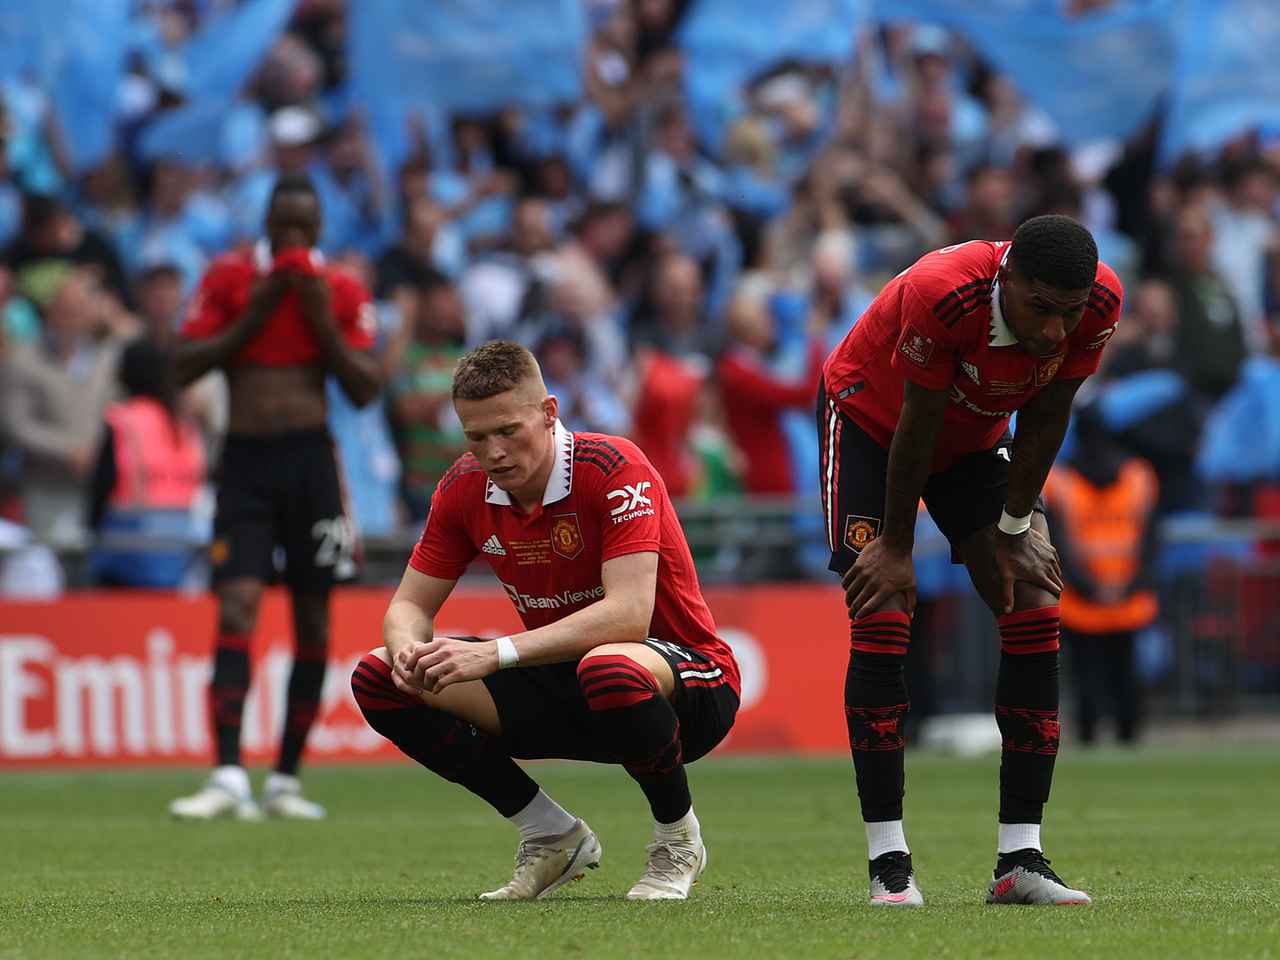 Manchester City vs Manchester United FA Cup 2023 Highlights: Man